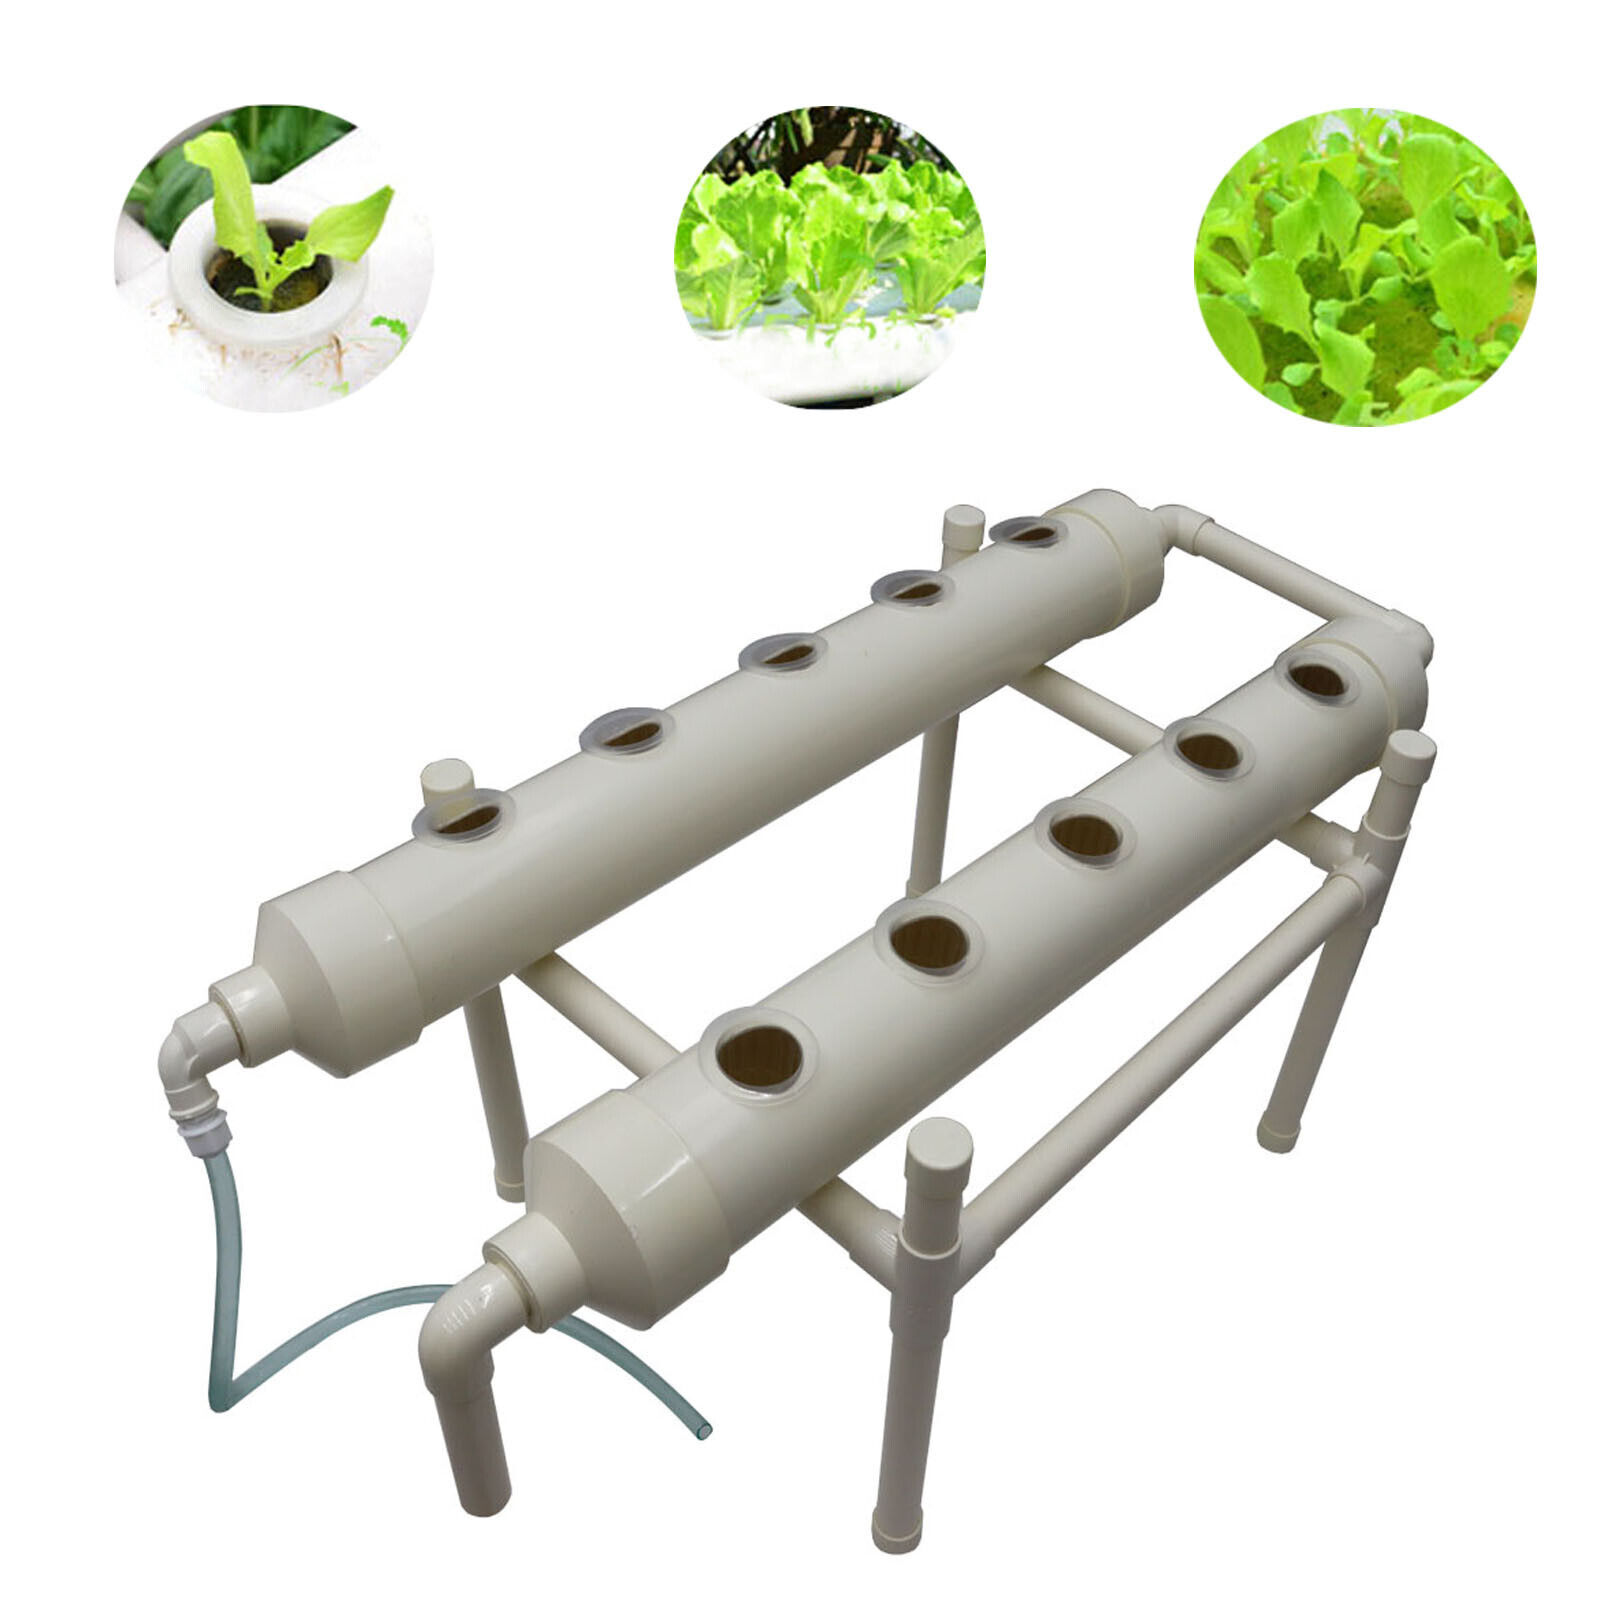 Hydroponic 10 Plant Site Grow Kit with 110V Water Pump 4.3in Pipe Diameter